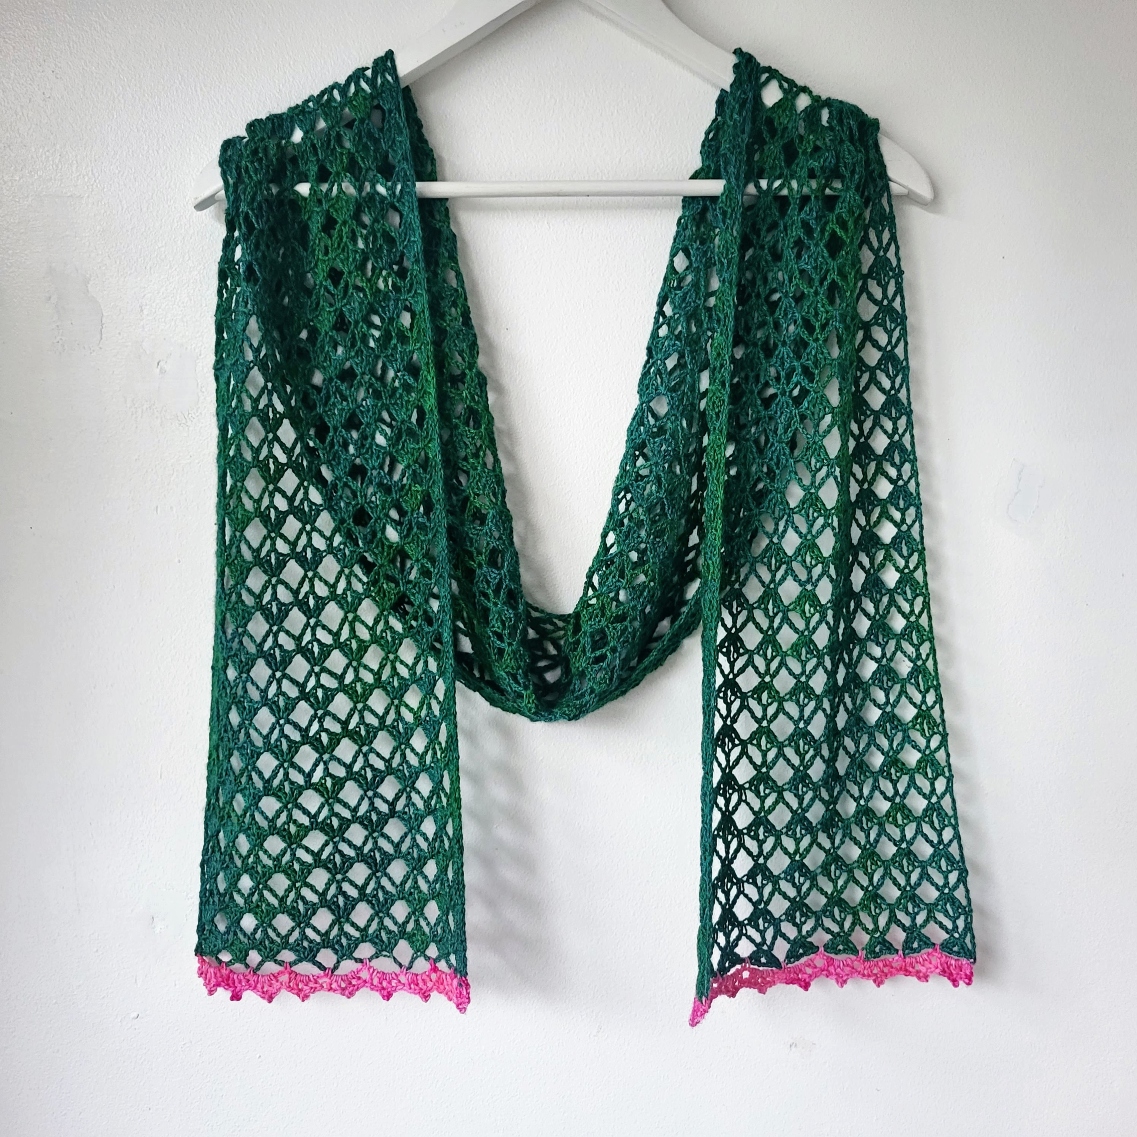 green crochet lace scarf hanging on a wall